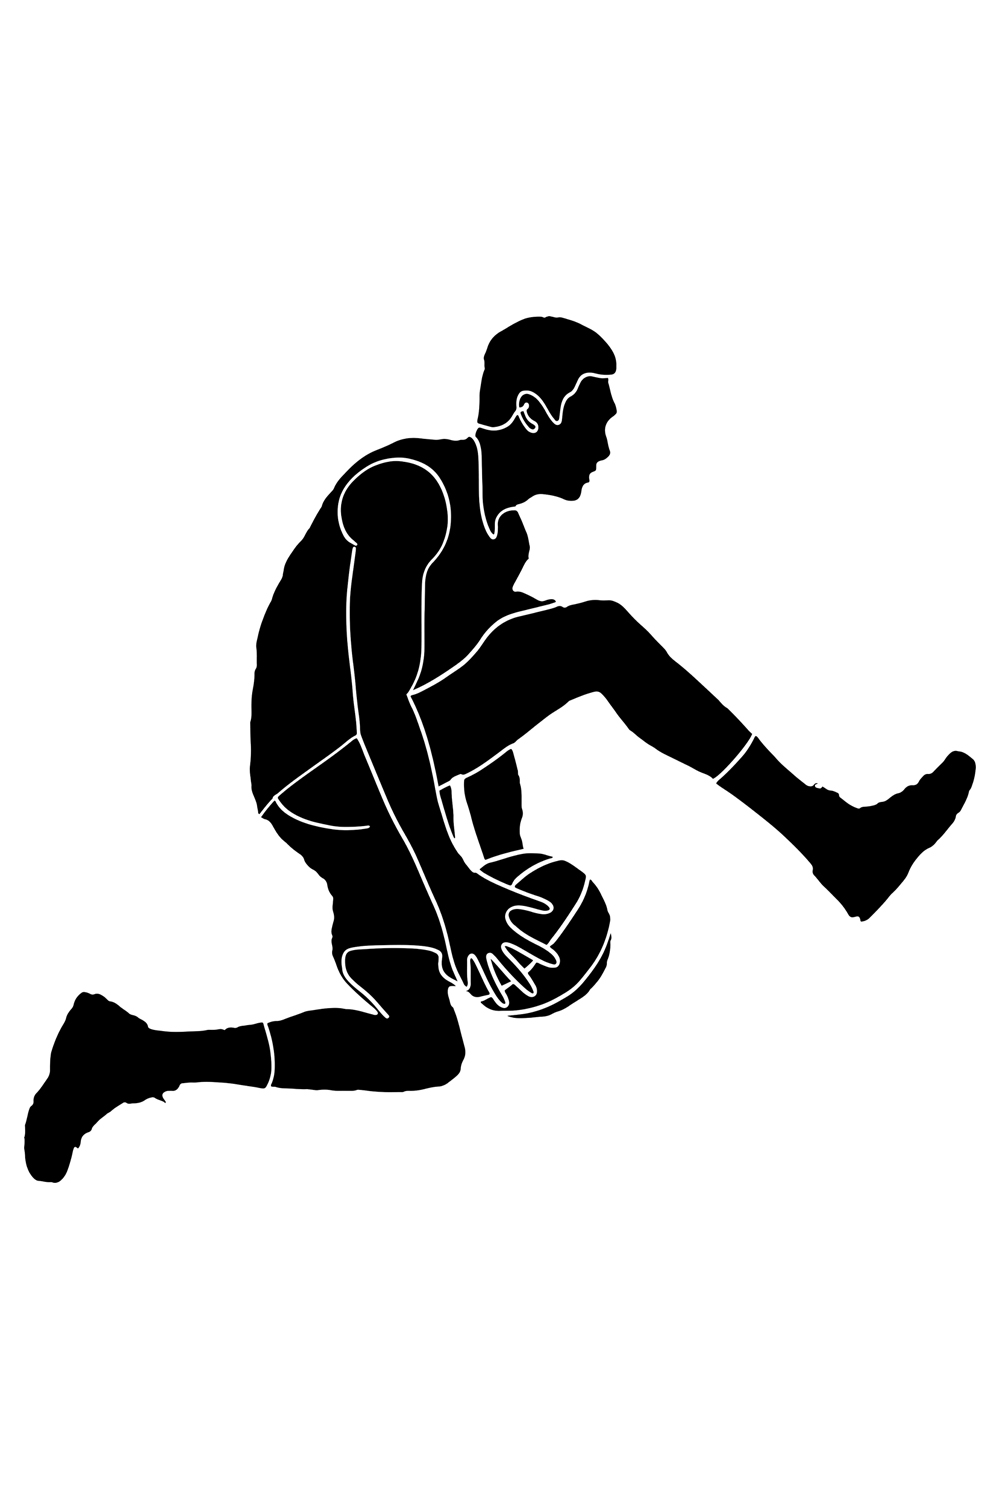 Silhouette of Basketball Player Soaring with Ball, Vector Illustration of Basketball Player Jumping High, Silhouetted Basketball Player in Mid-Air Leap pinterest preview image.